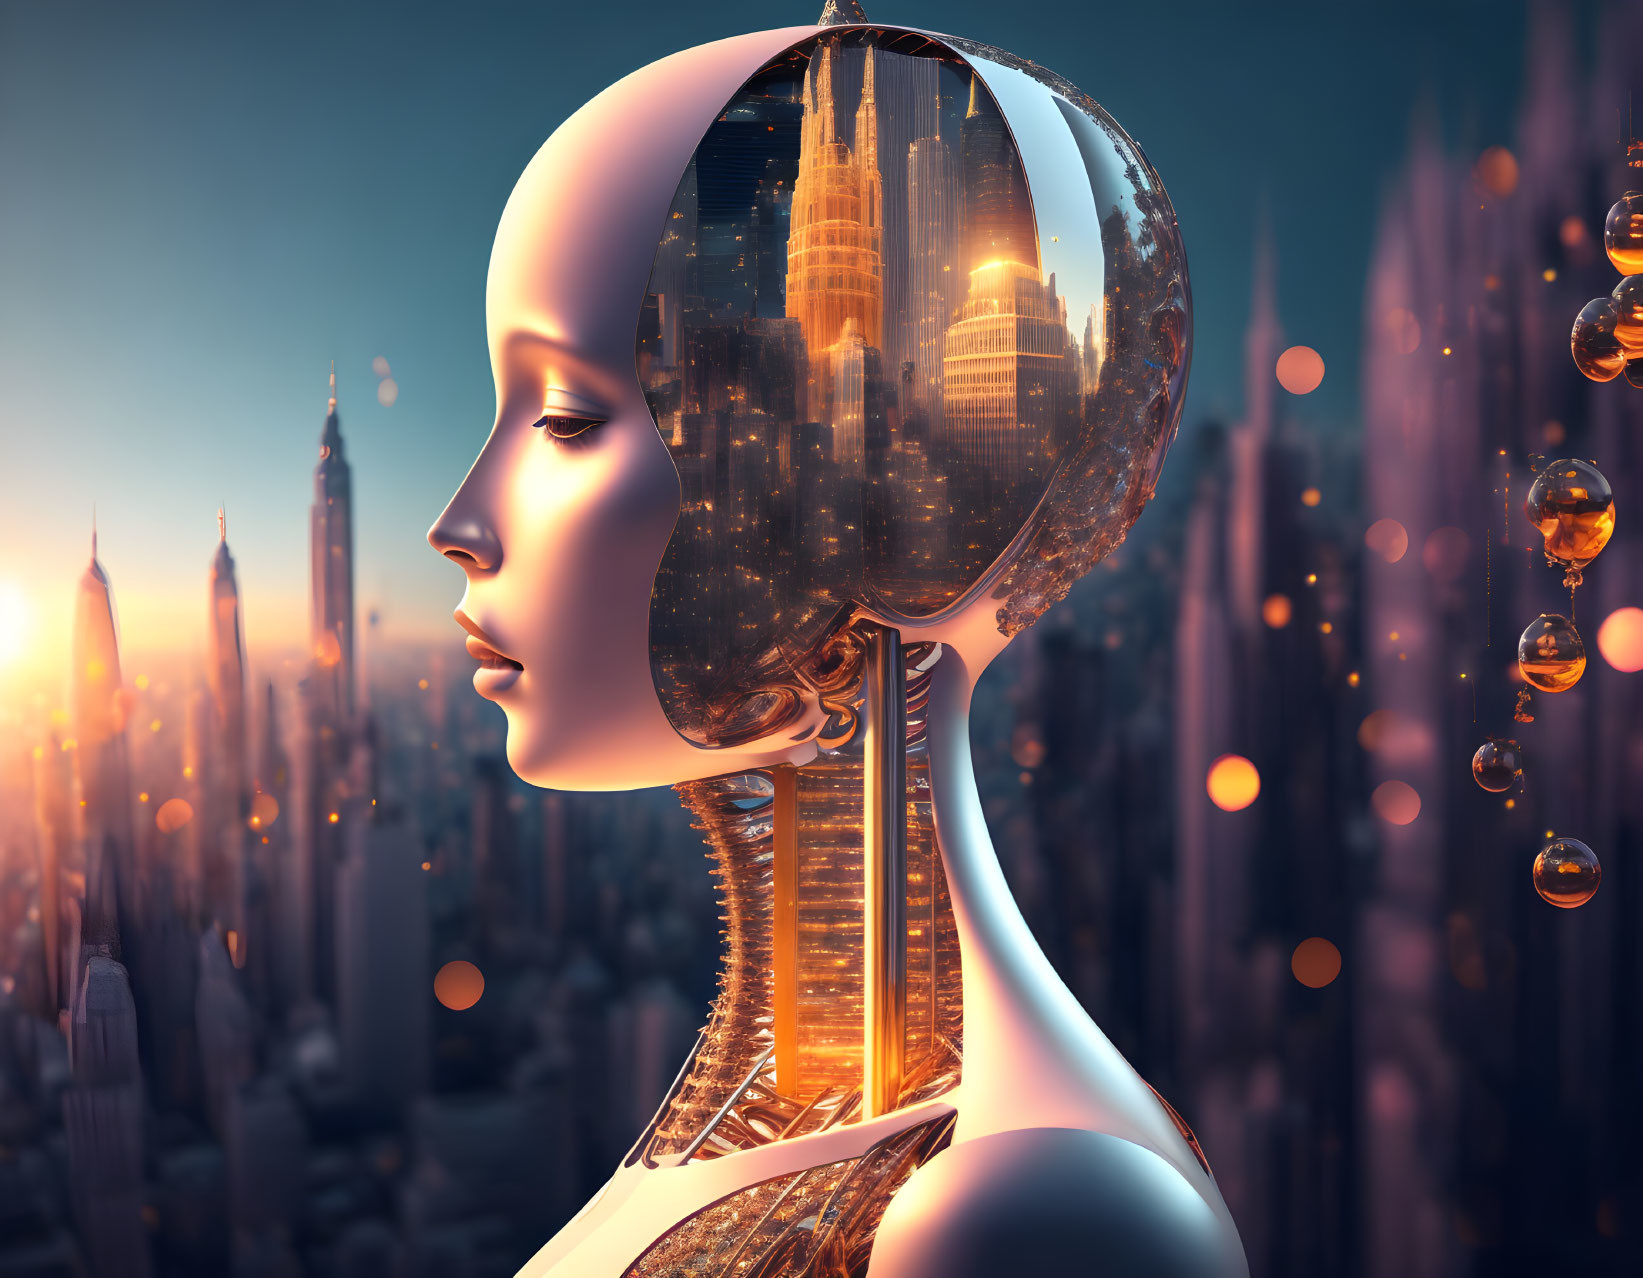 Transparent futuristic robotic head with cityscape view against evening sky